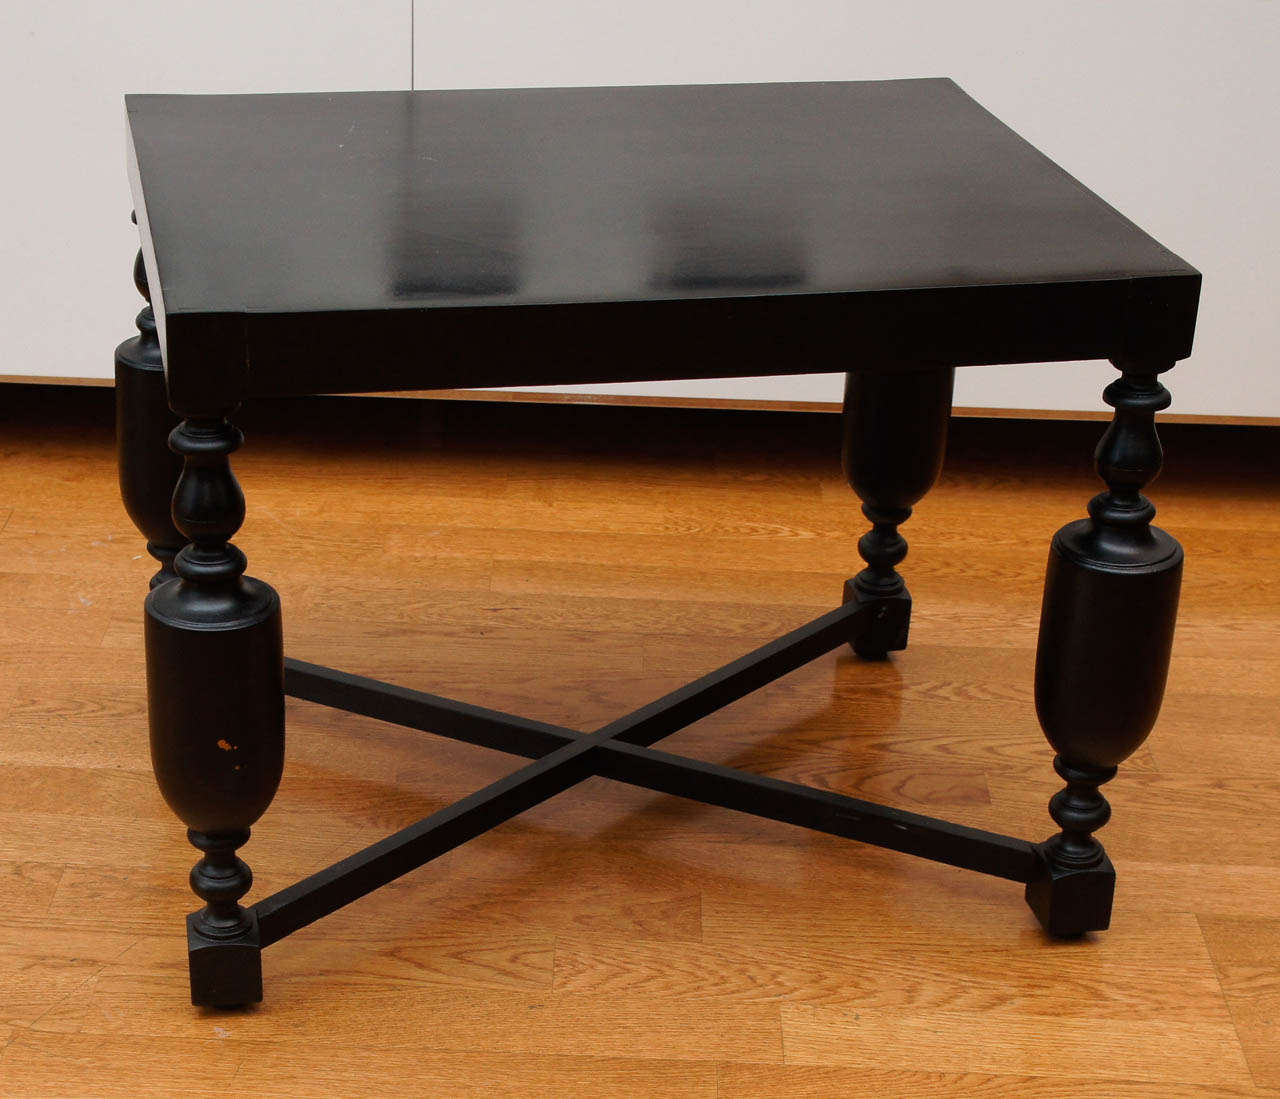 wood side table, newly finished in a dark ebony stain.
appealing, x-base stretcher, with turned legs.